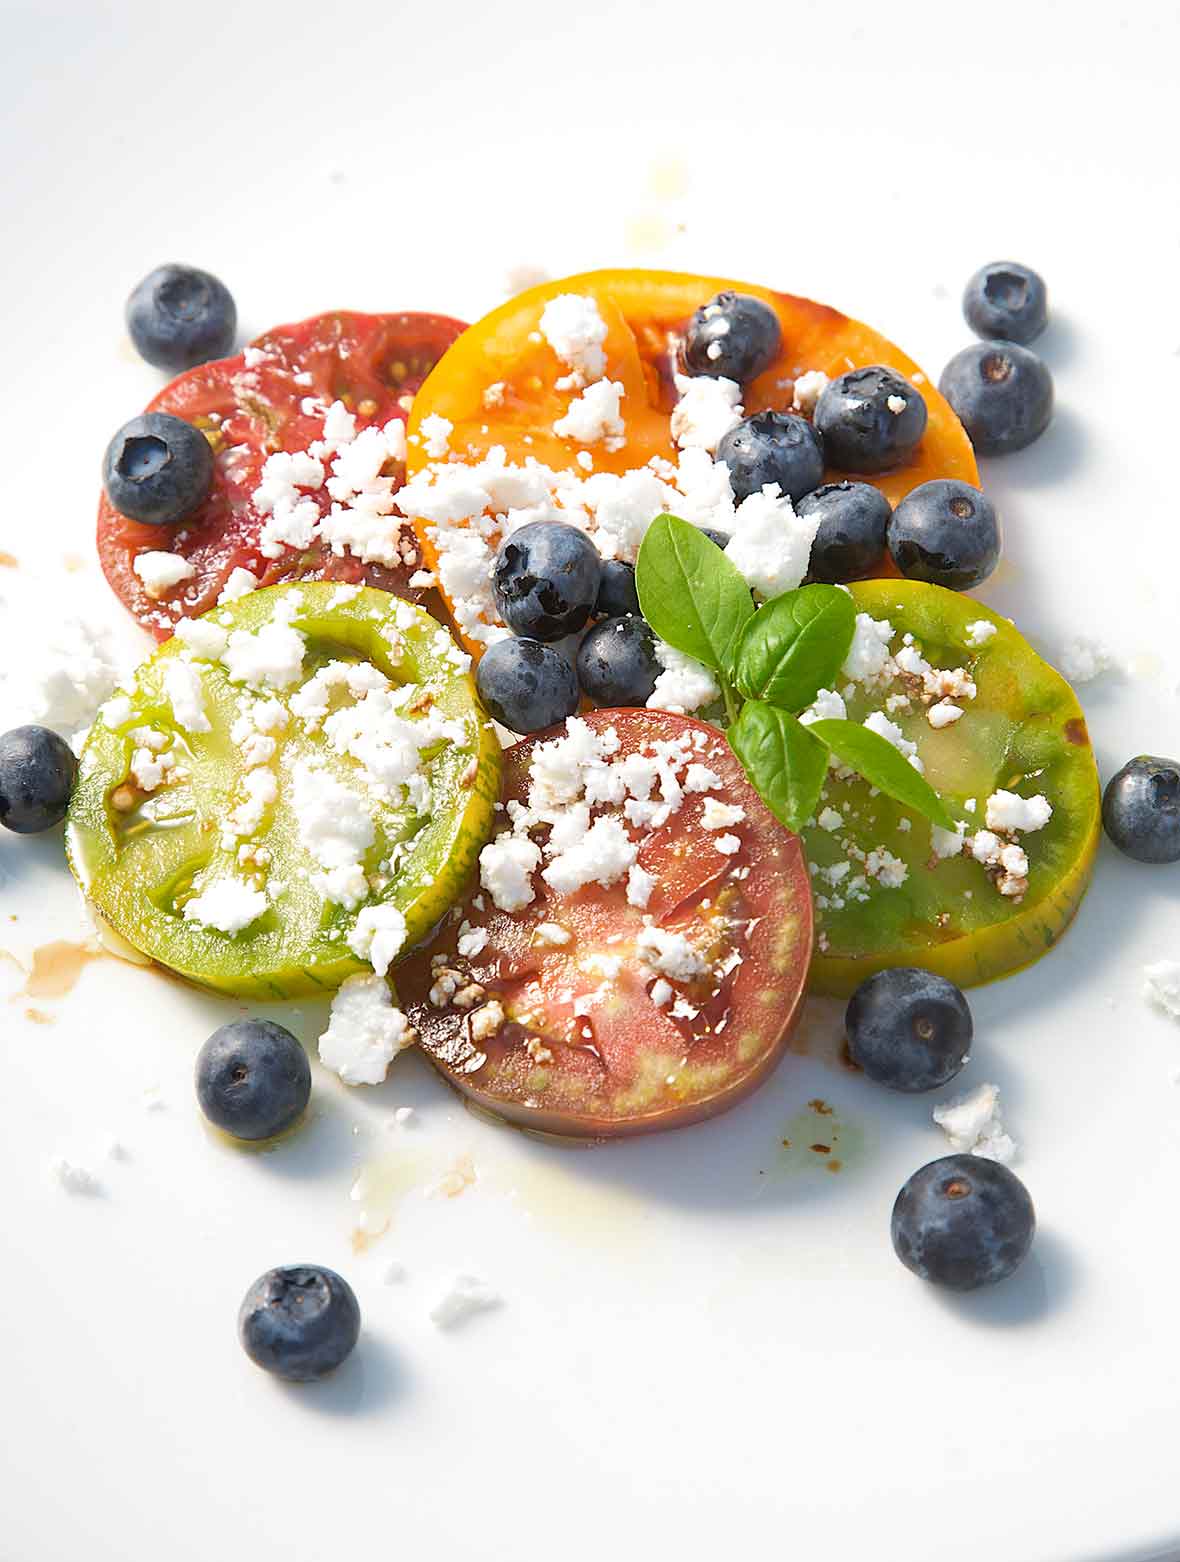 Sliced tomatoes with blueberries and crumbled feta scattered on top and a sprig of basil for garnish.